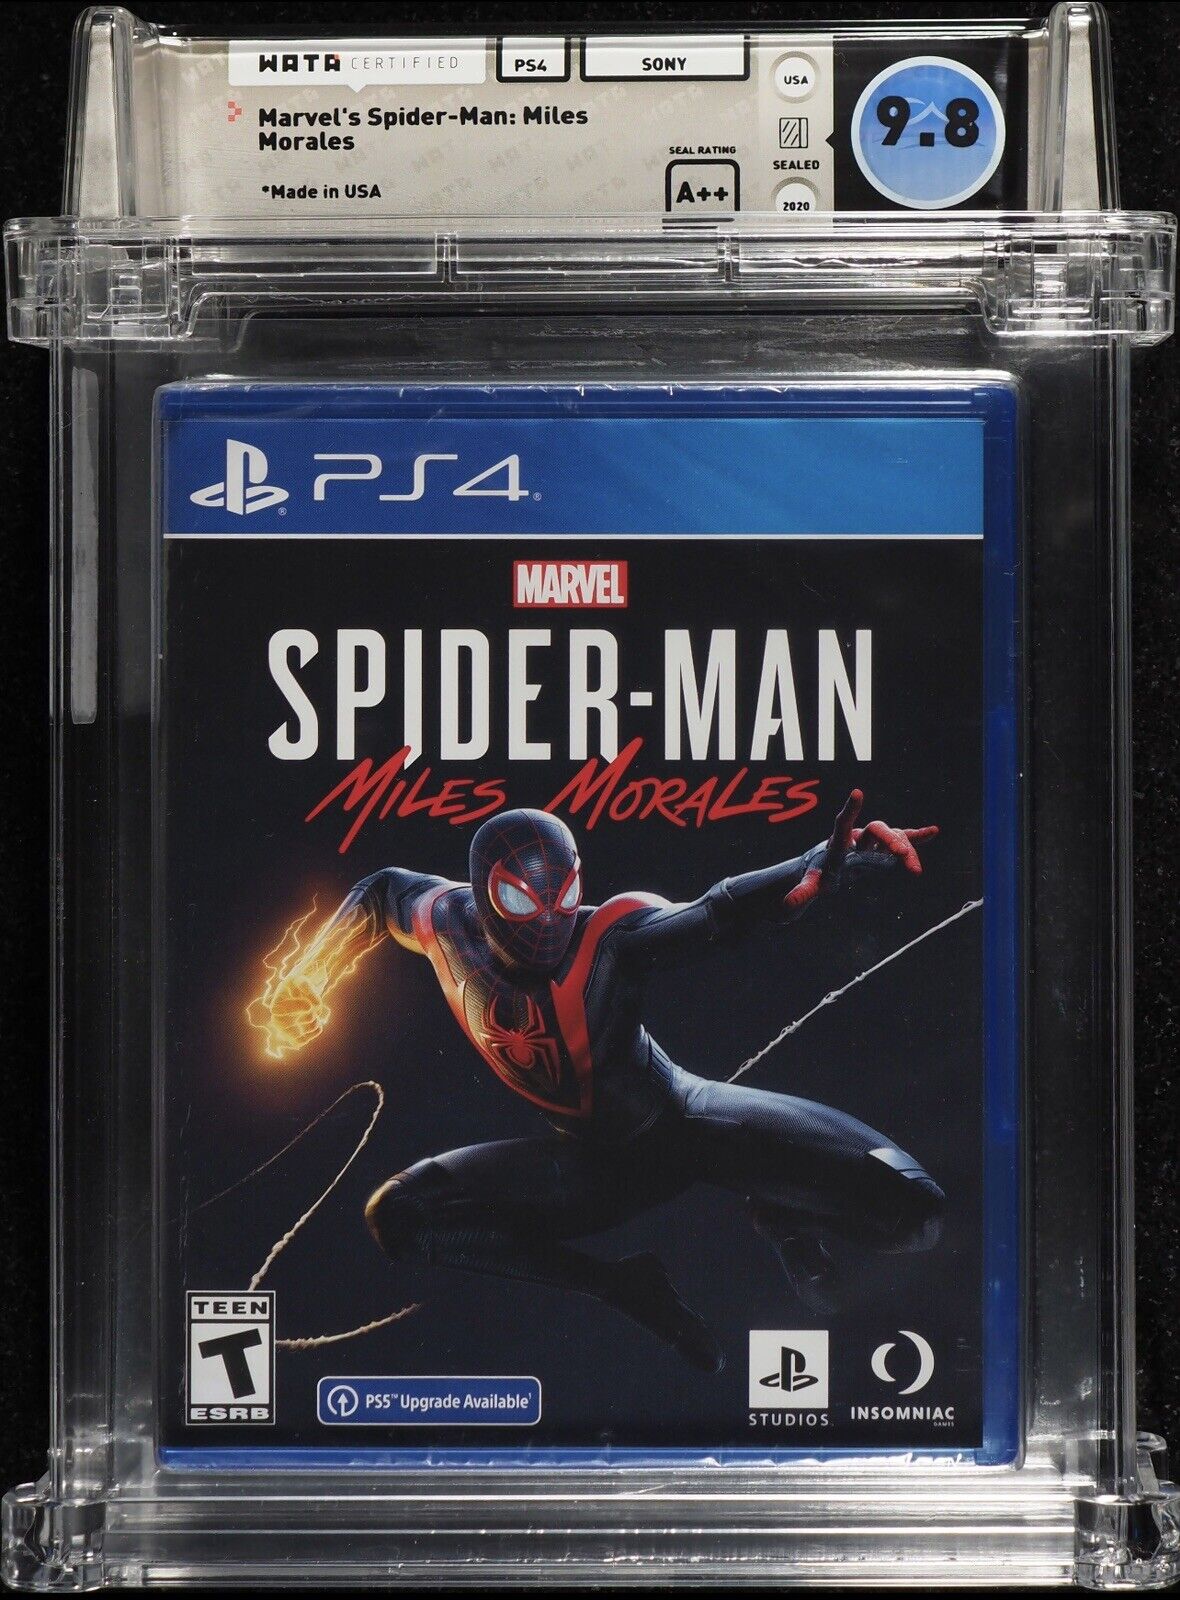 Marvel's Spider-Man: Miles Morales (Sony Playstation 4 PS4) WATA 9.8 A++ Sealed